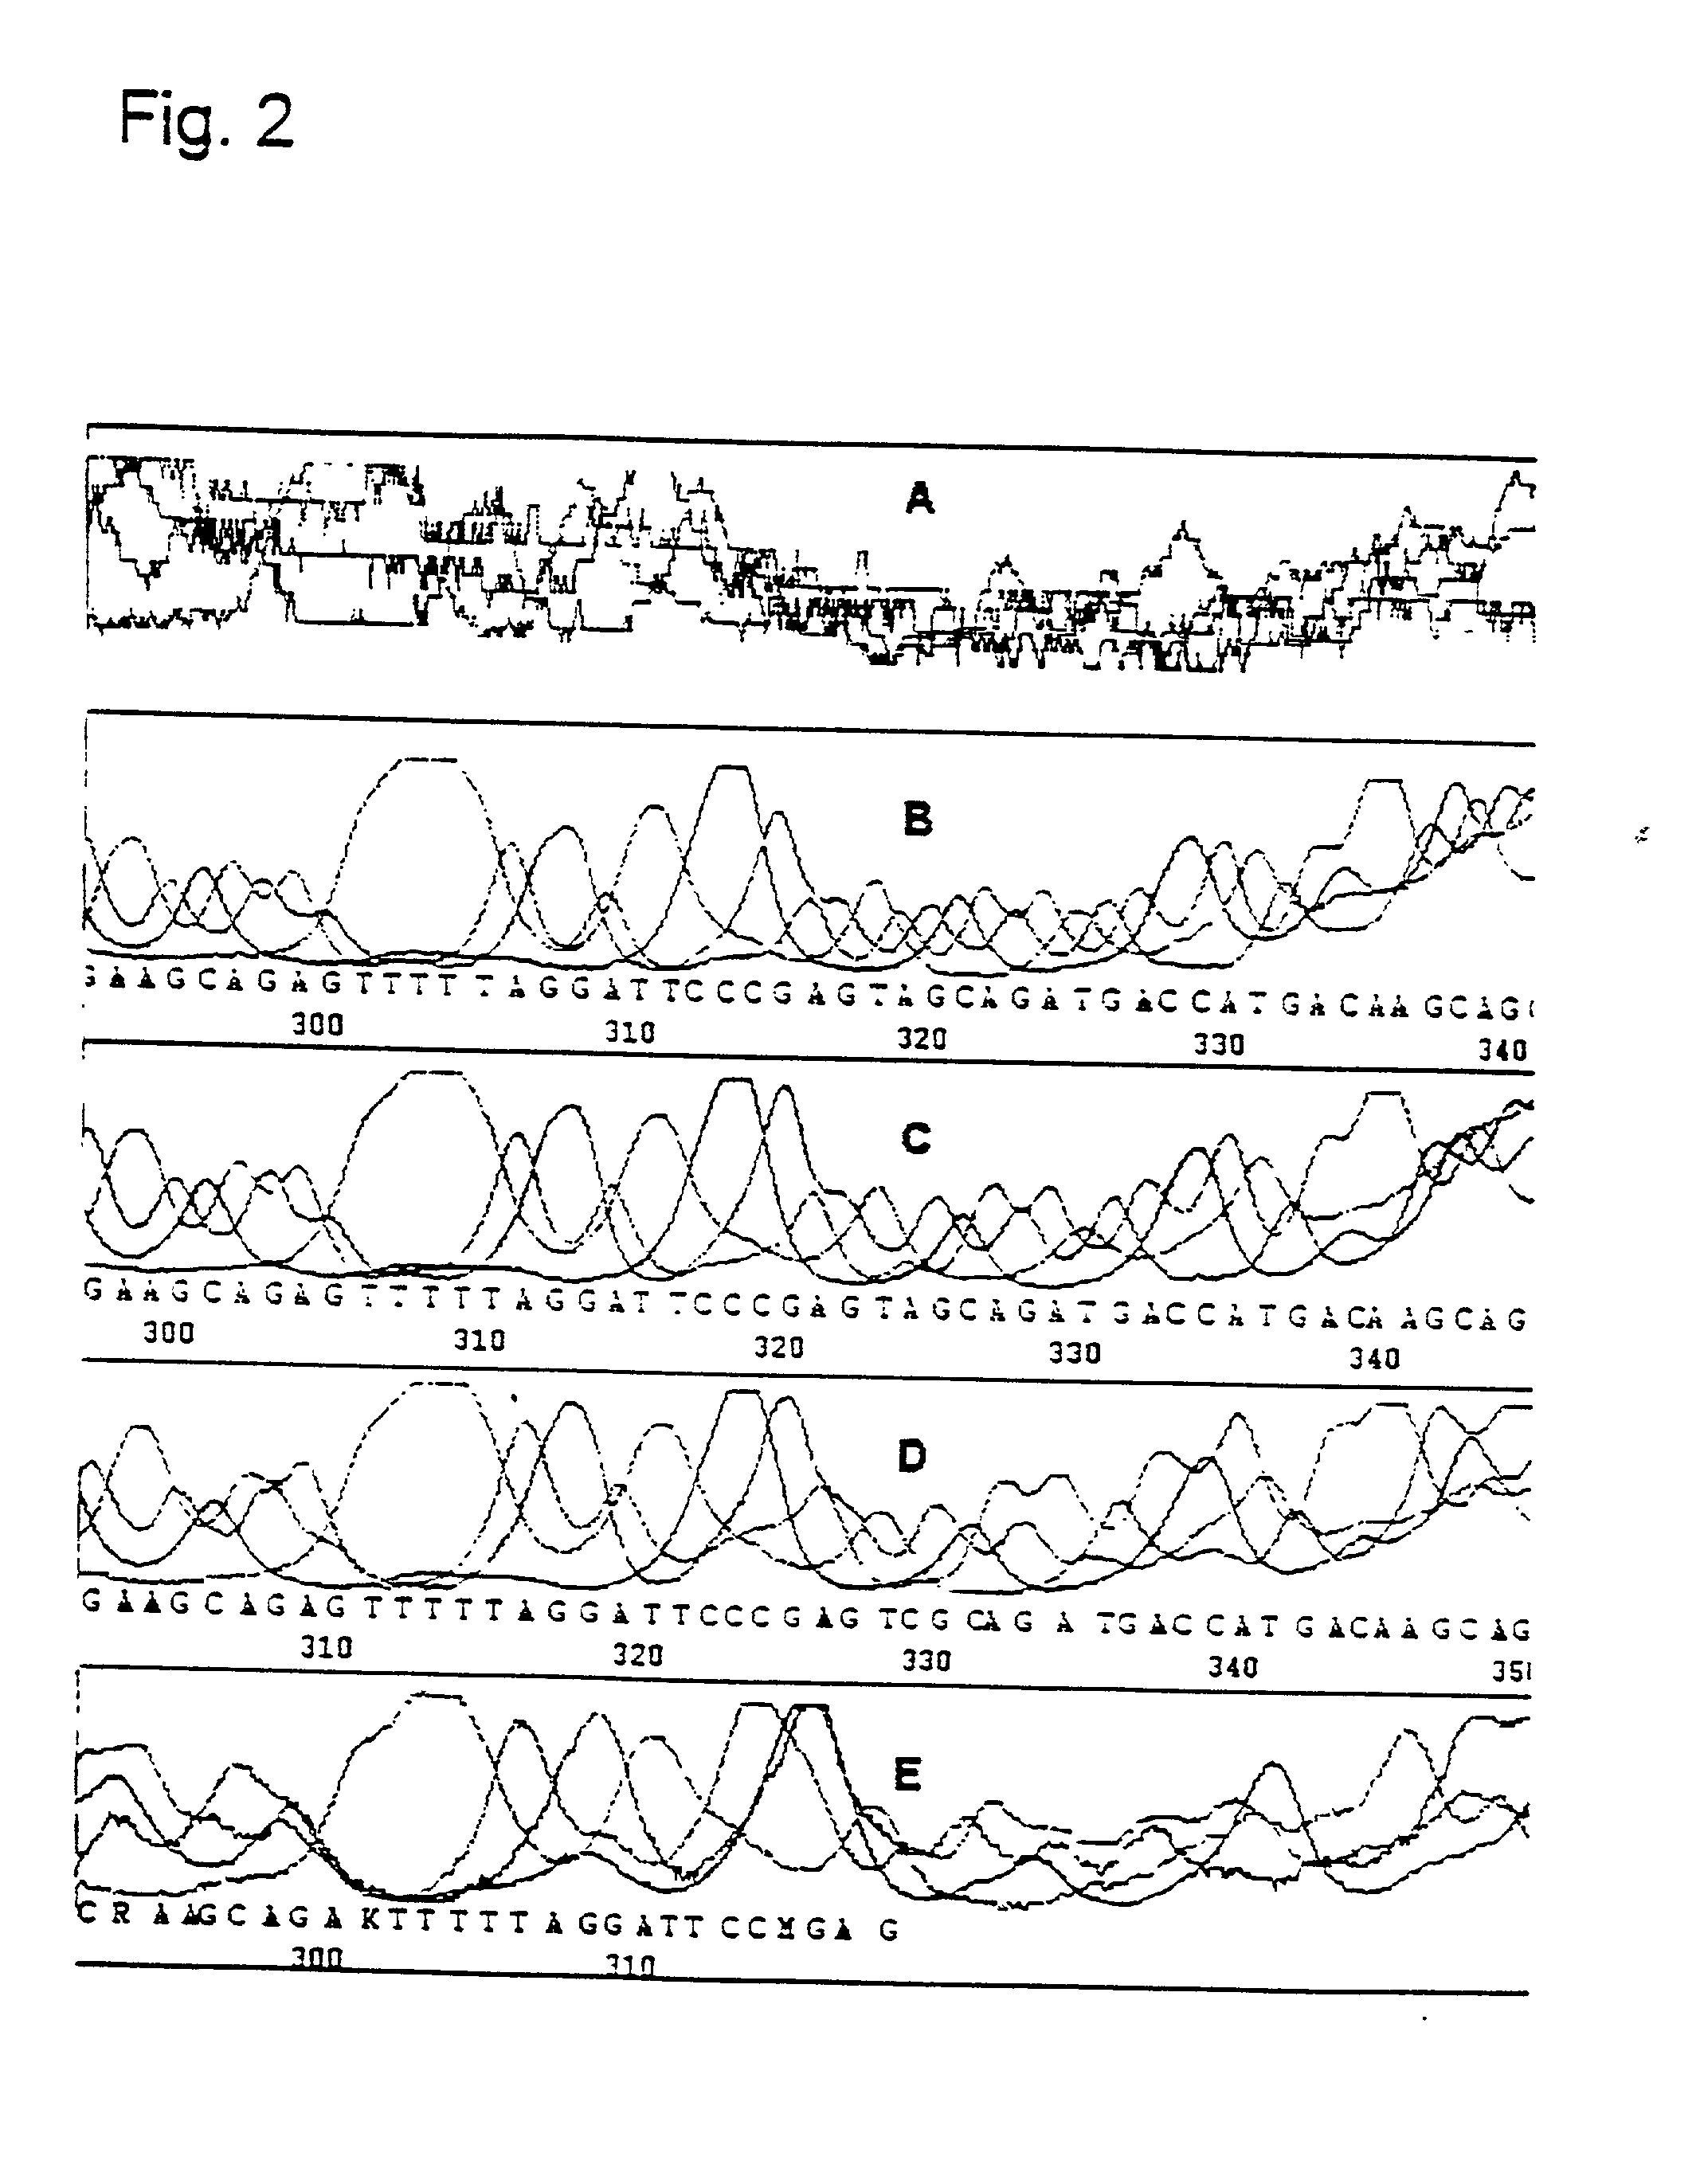 Method for the uncoupled, direct, exponential amplification and sequencing of DNA molecules with the addition of a second thermostable DNA polymerase and its application